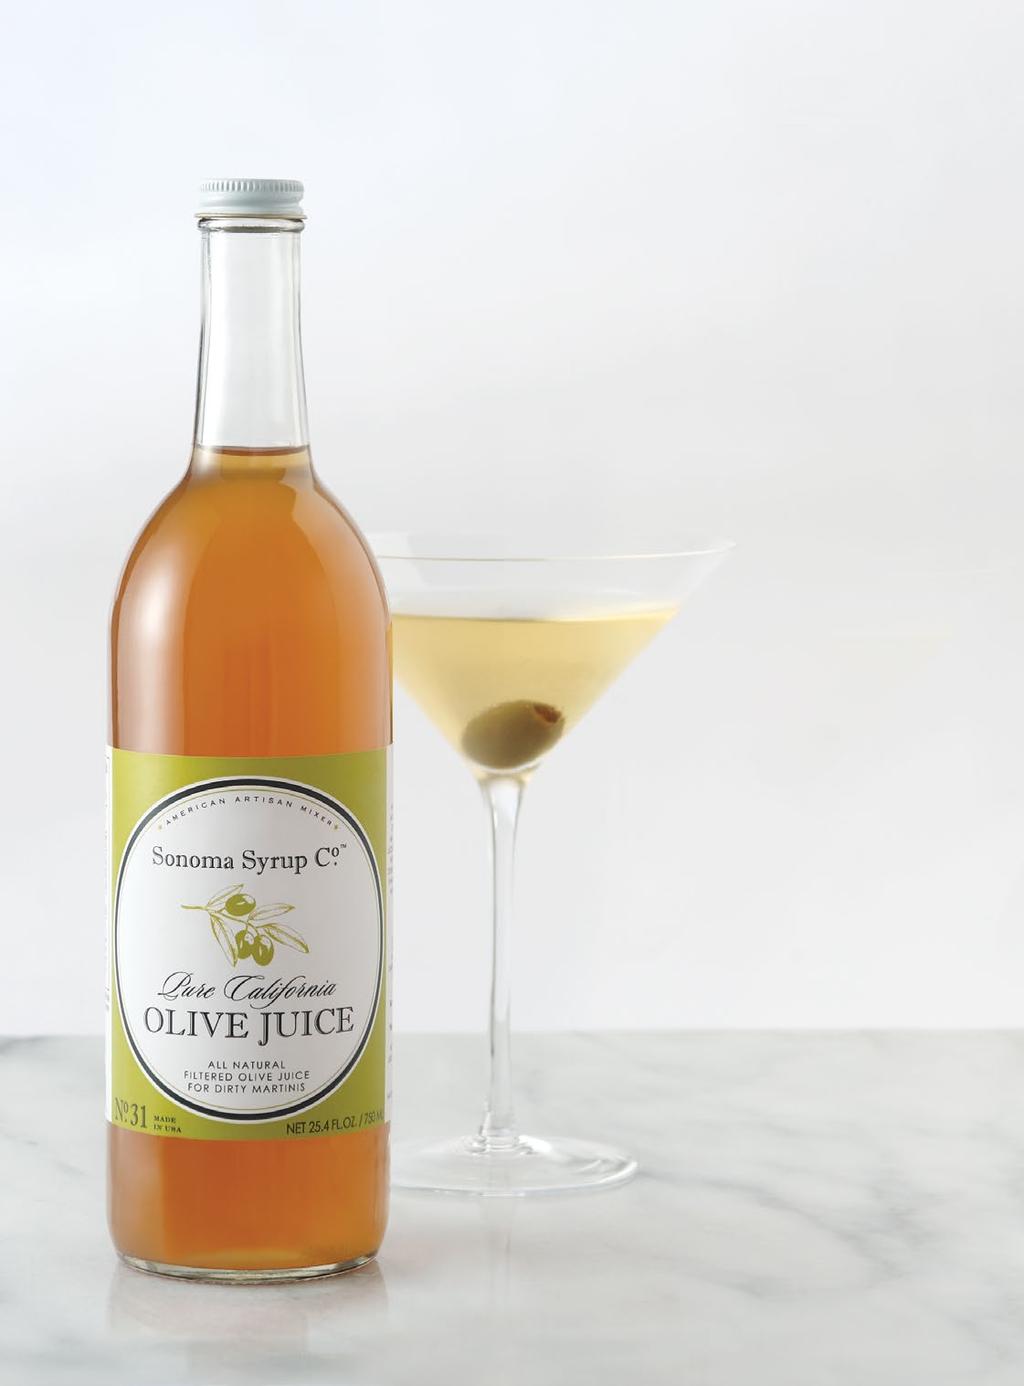 Dirty Martini in a bottle Pure California Olive Juice 8 oz. SS-31 $10.95 25.4 oz. SS-231 $18.